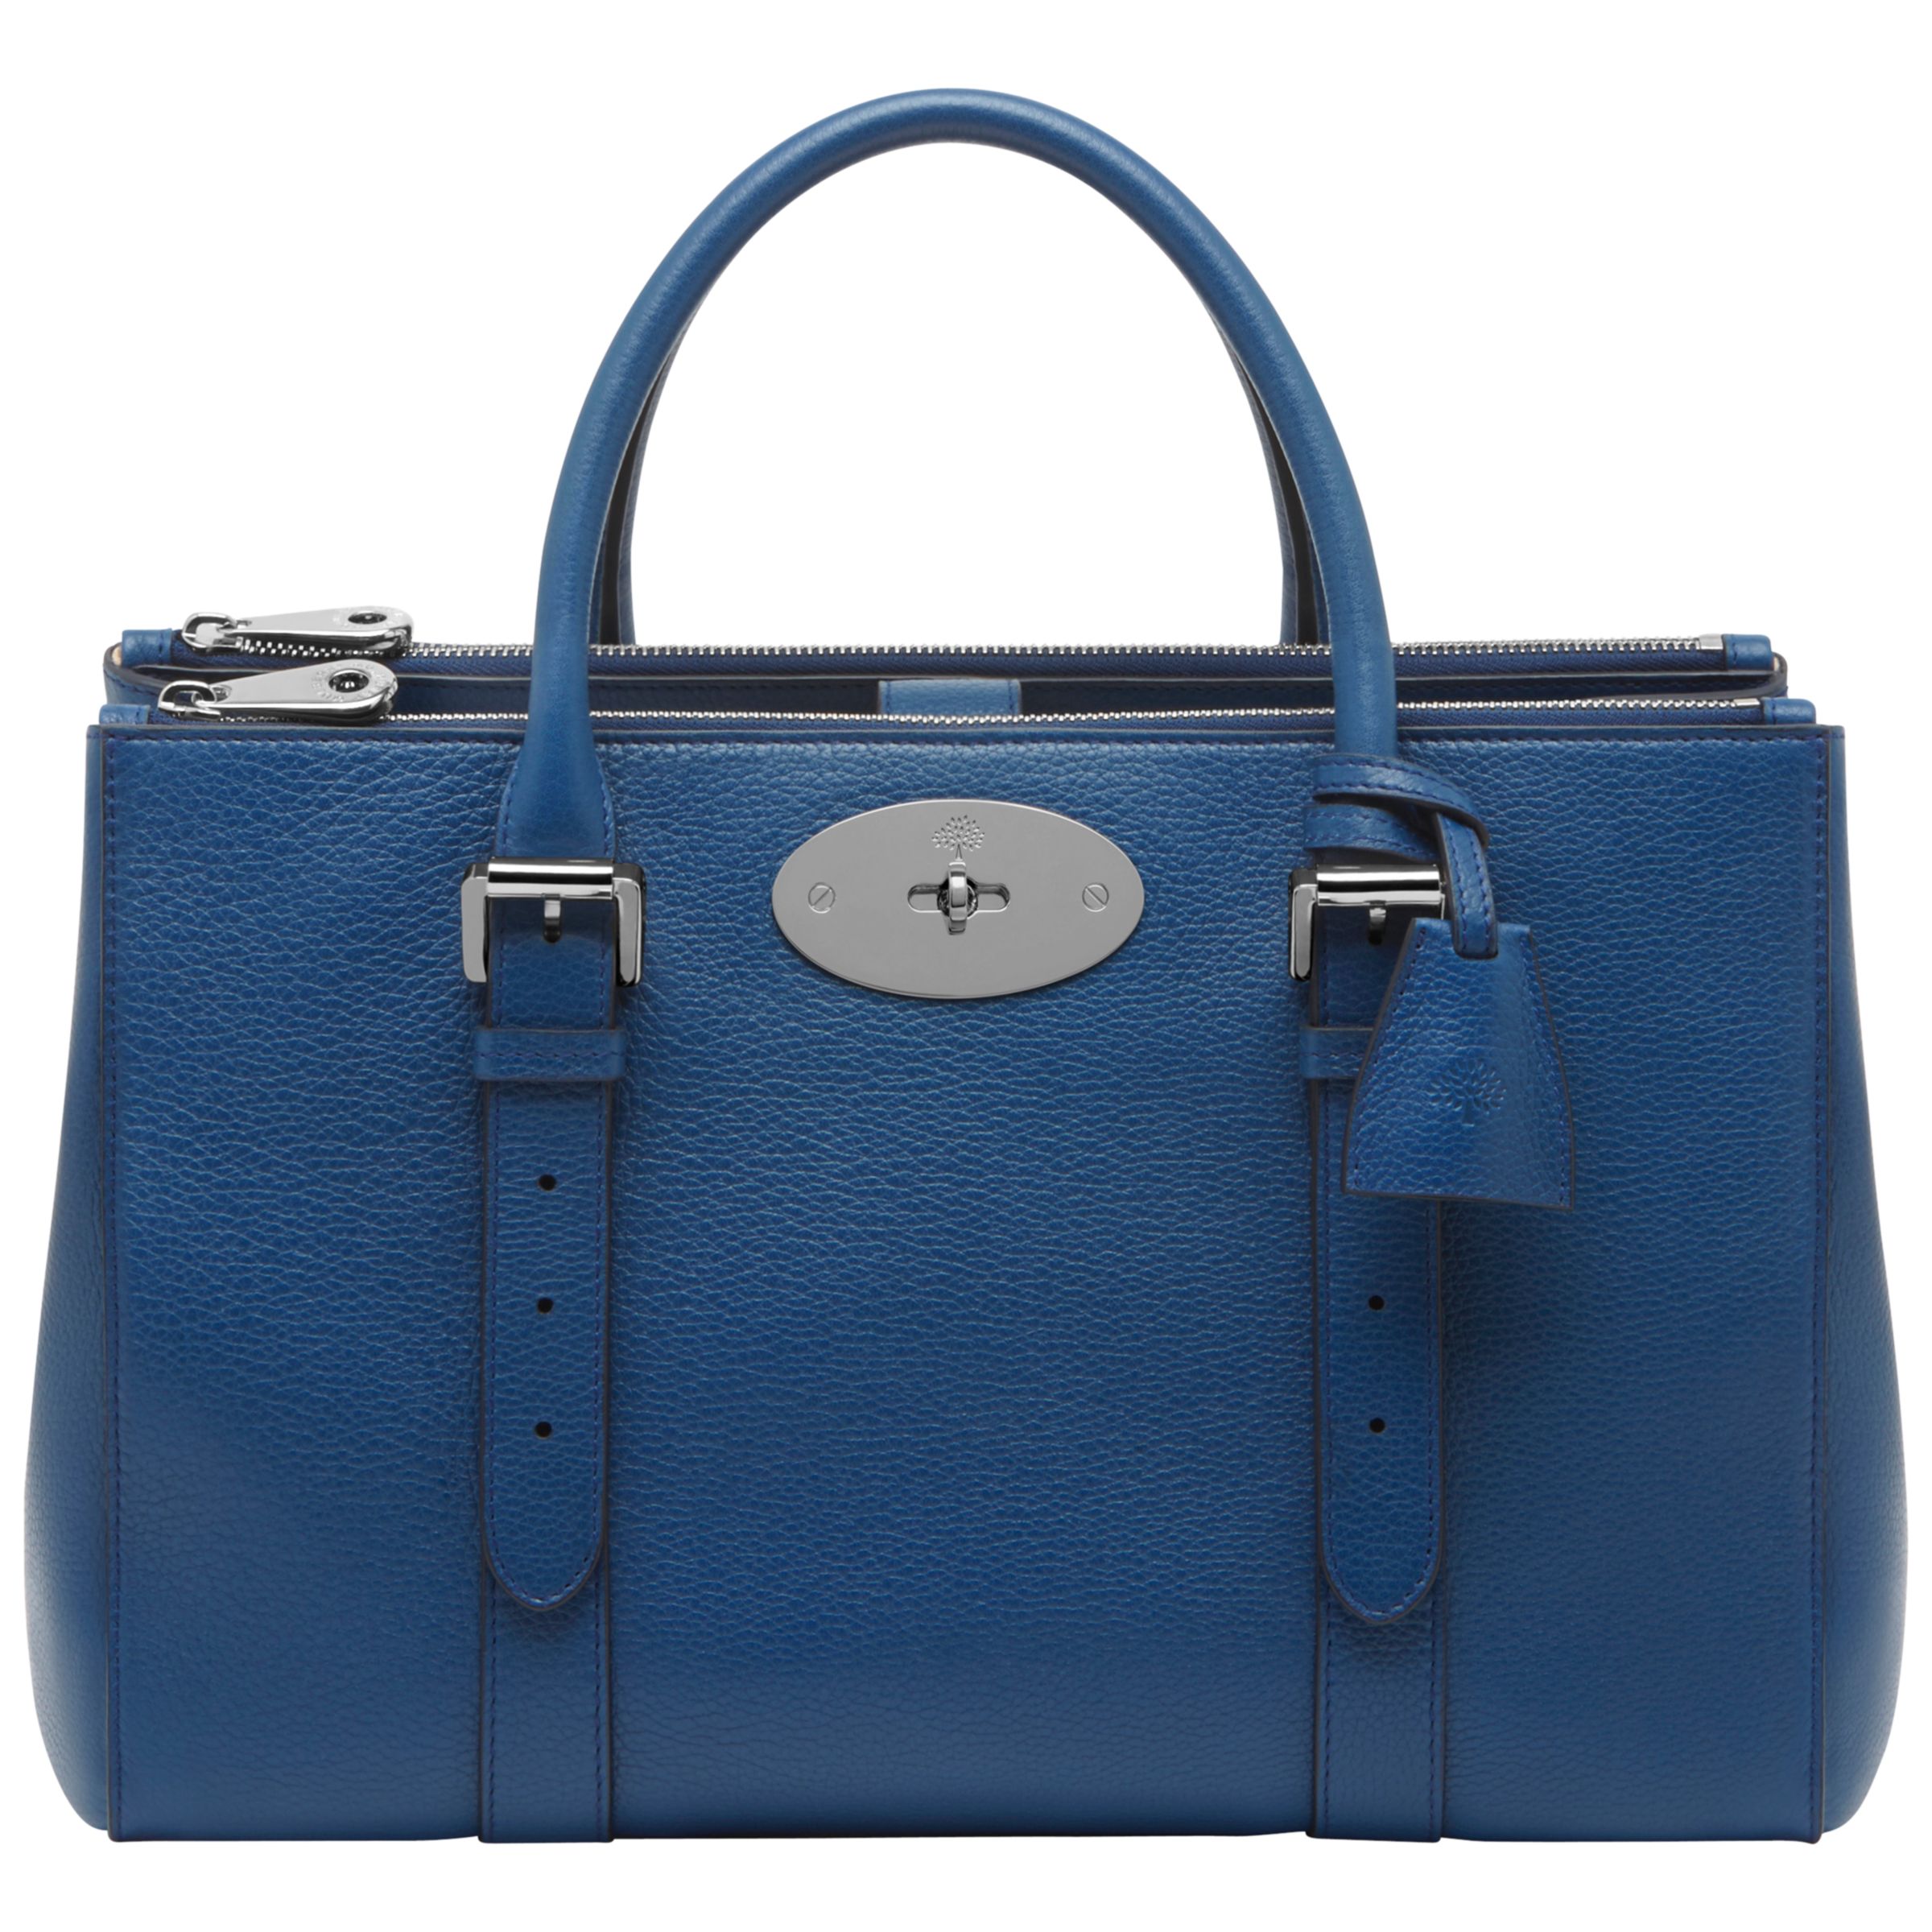 Mulberry Bayswater Leather Double Zip Tote Bag, Sea Blue